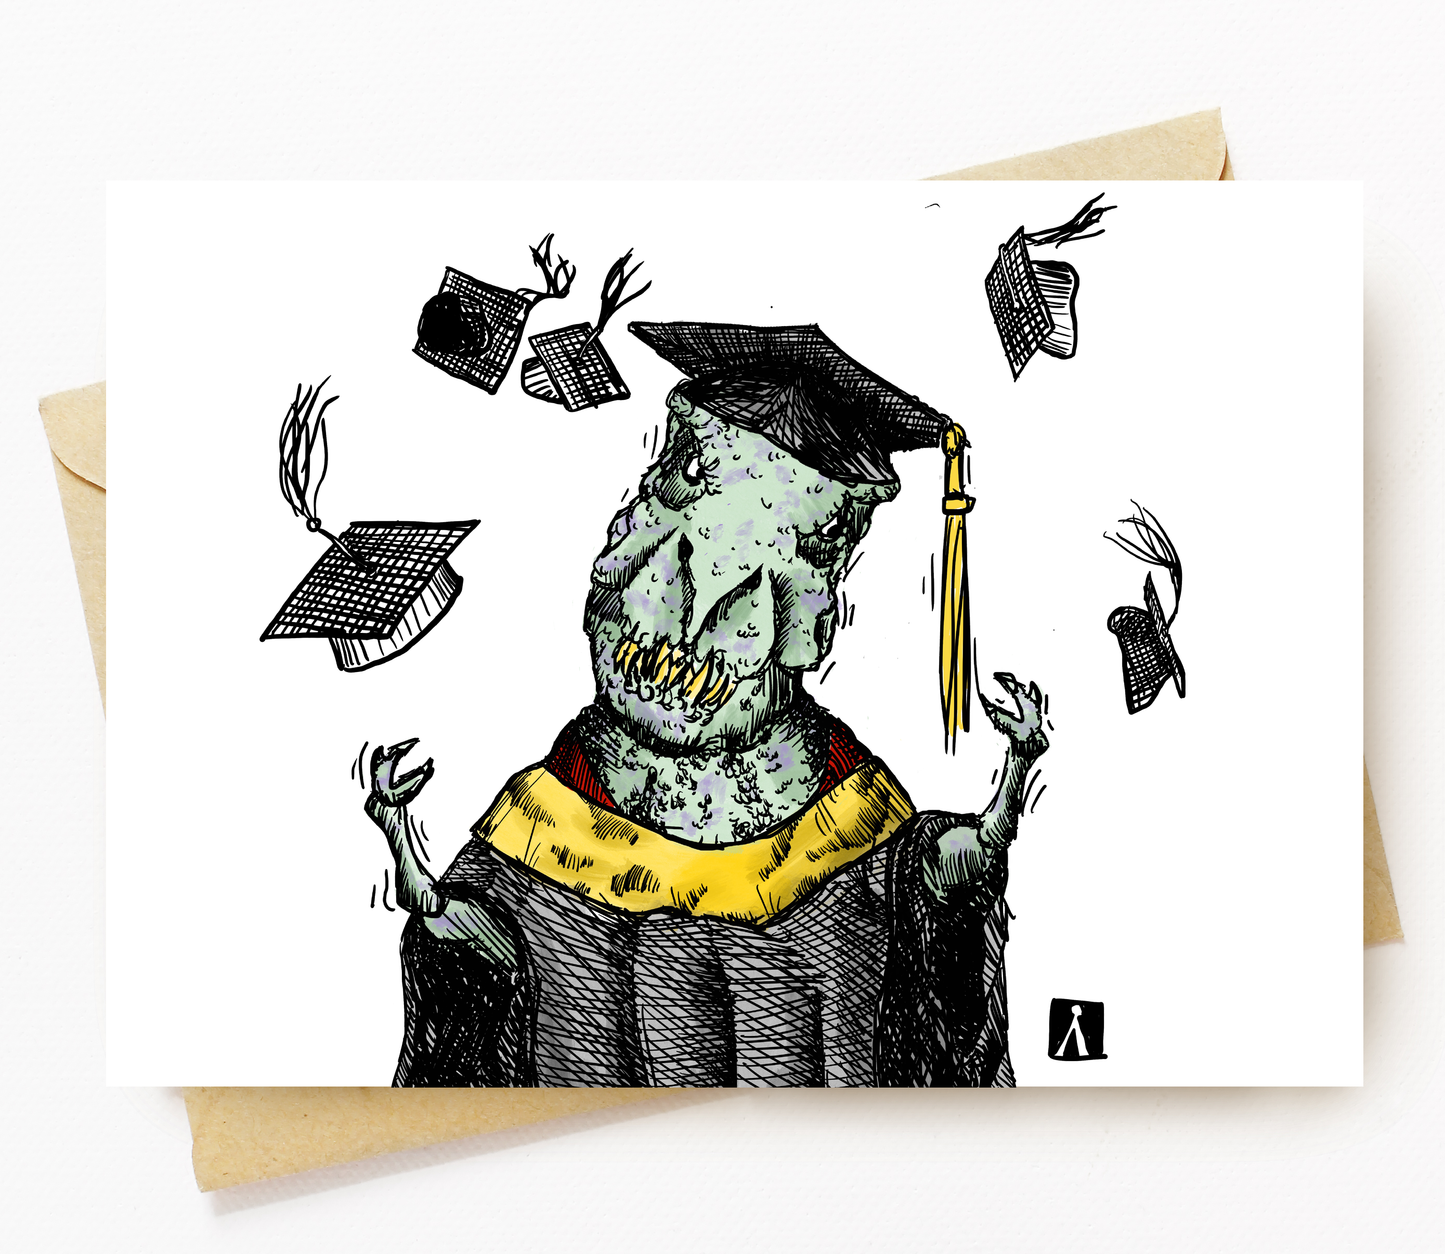 BellavanceInk: Graduation Greeting Card With Dinosaur T-Rex Trying To Reach Their Graduation Cap Pen & Ink Illustration 5 x 7 Inches